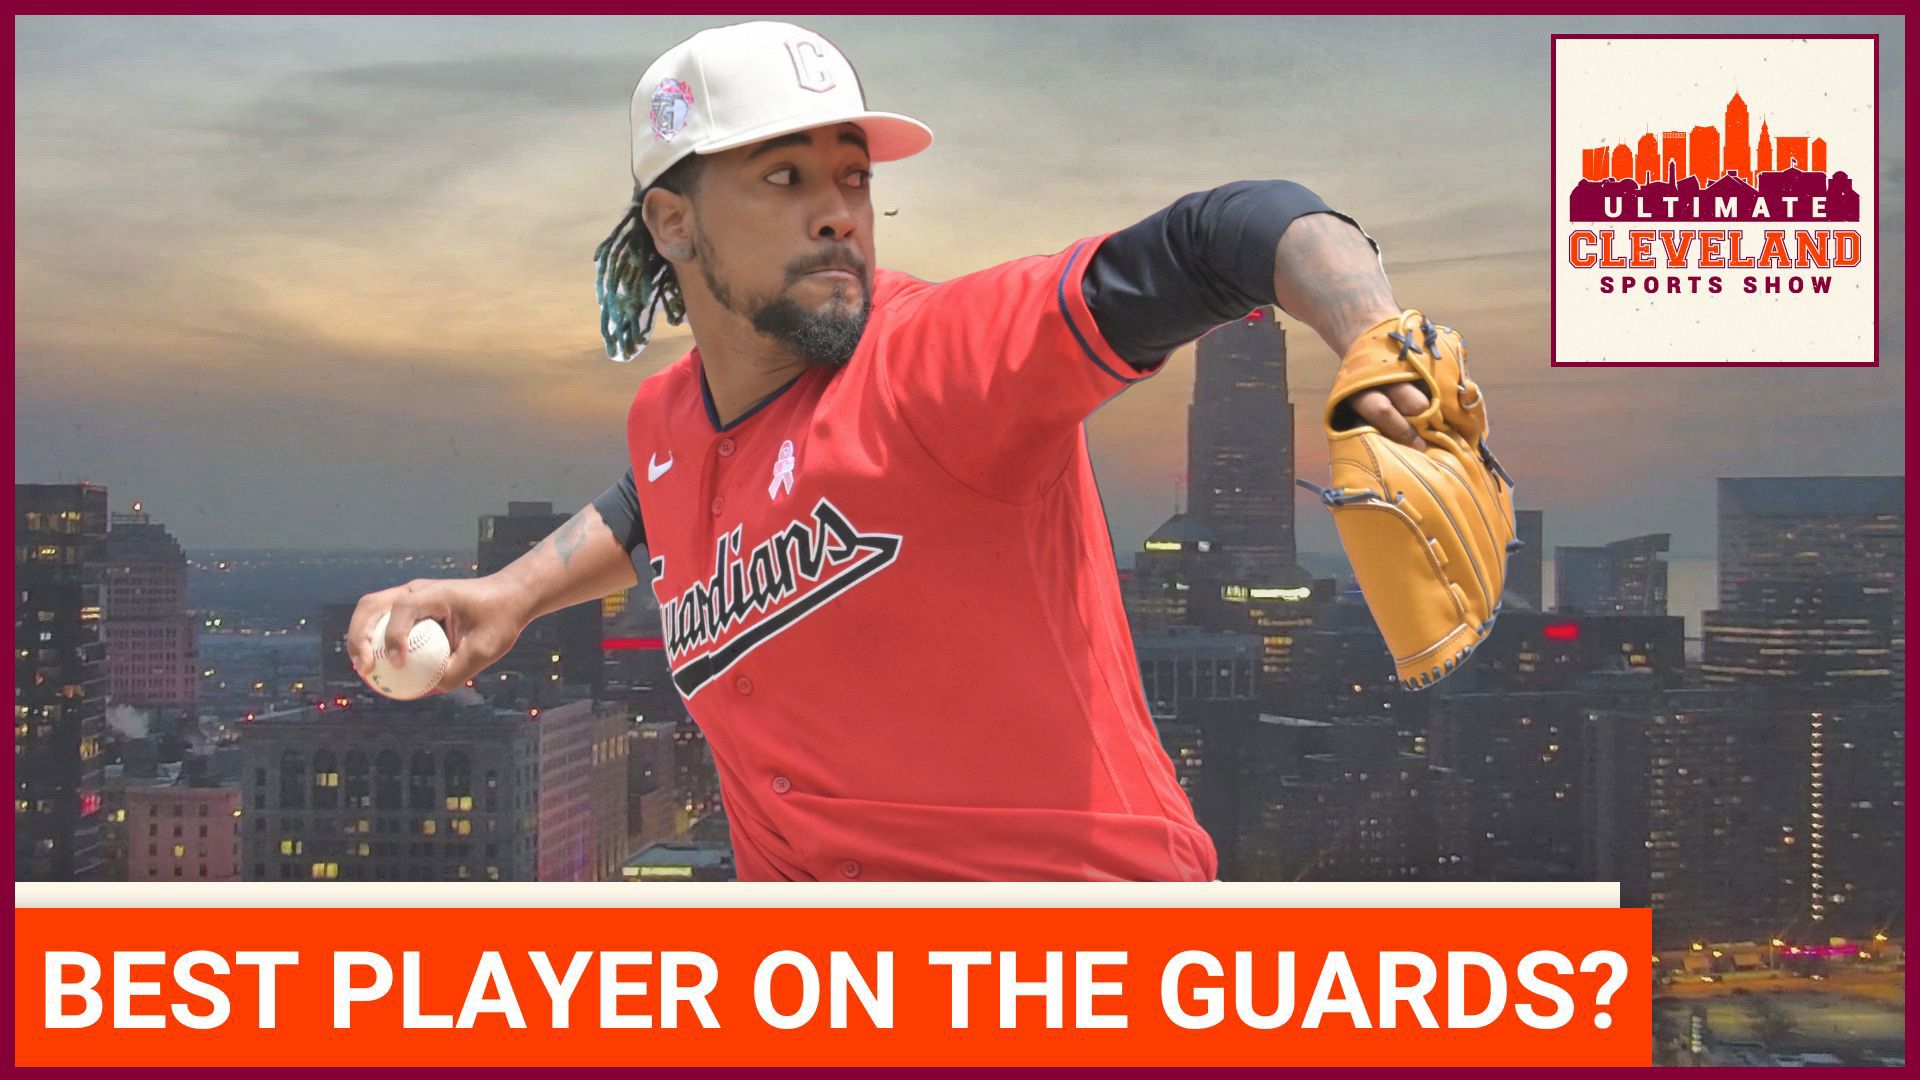 Emmanuel Clase has become one of MLB’s elite closers but is he the best player on the Cleveland Guardians or does that title still belong to Jose Ramirez? Playing tw